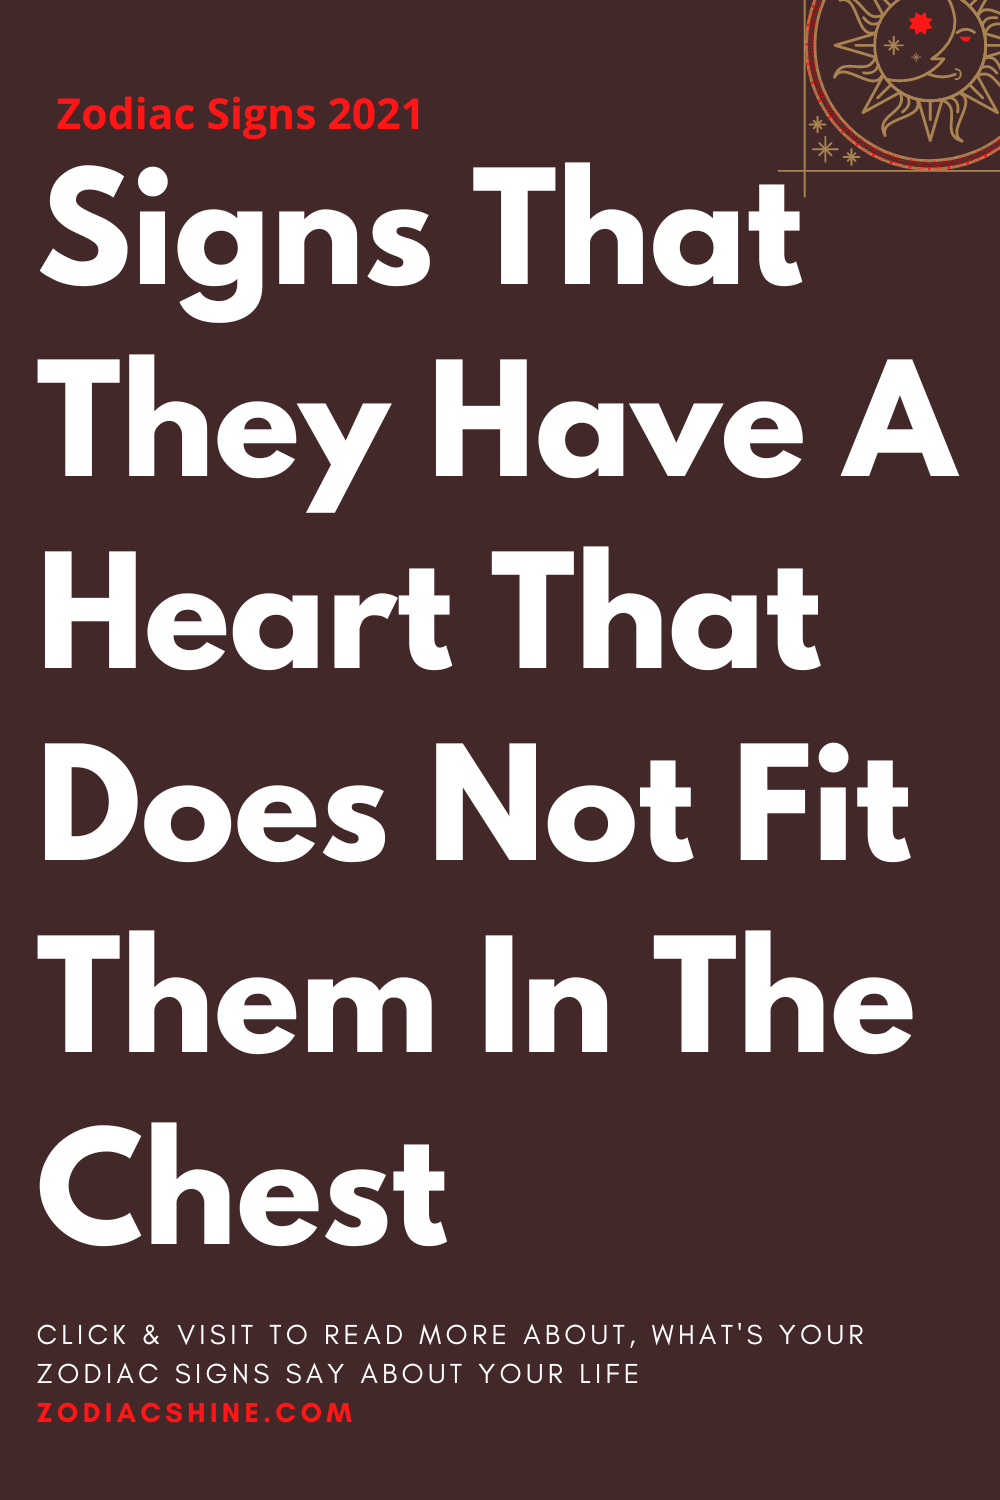 Signs That They Have A Heart That Does Not Fit Them In The Chest